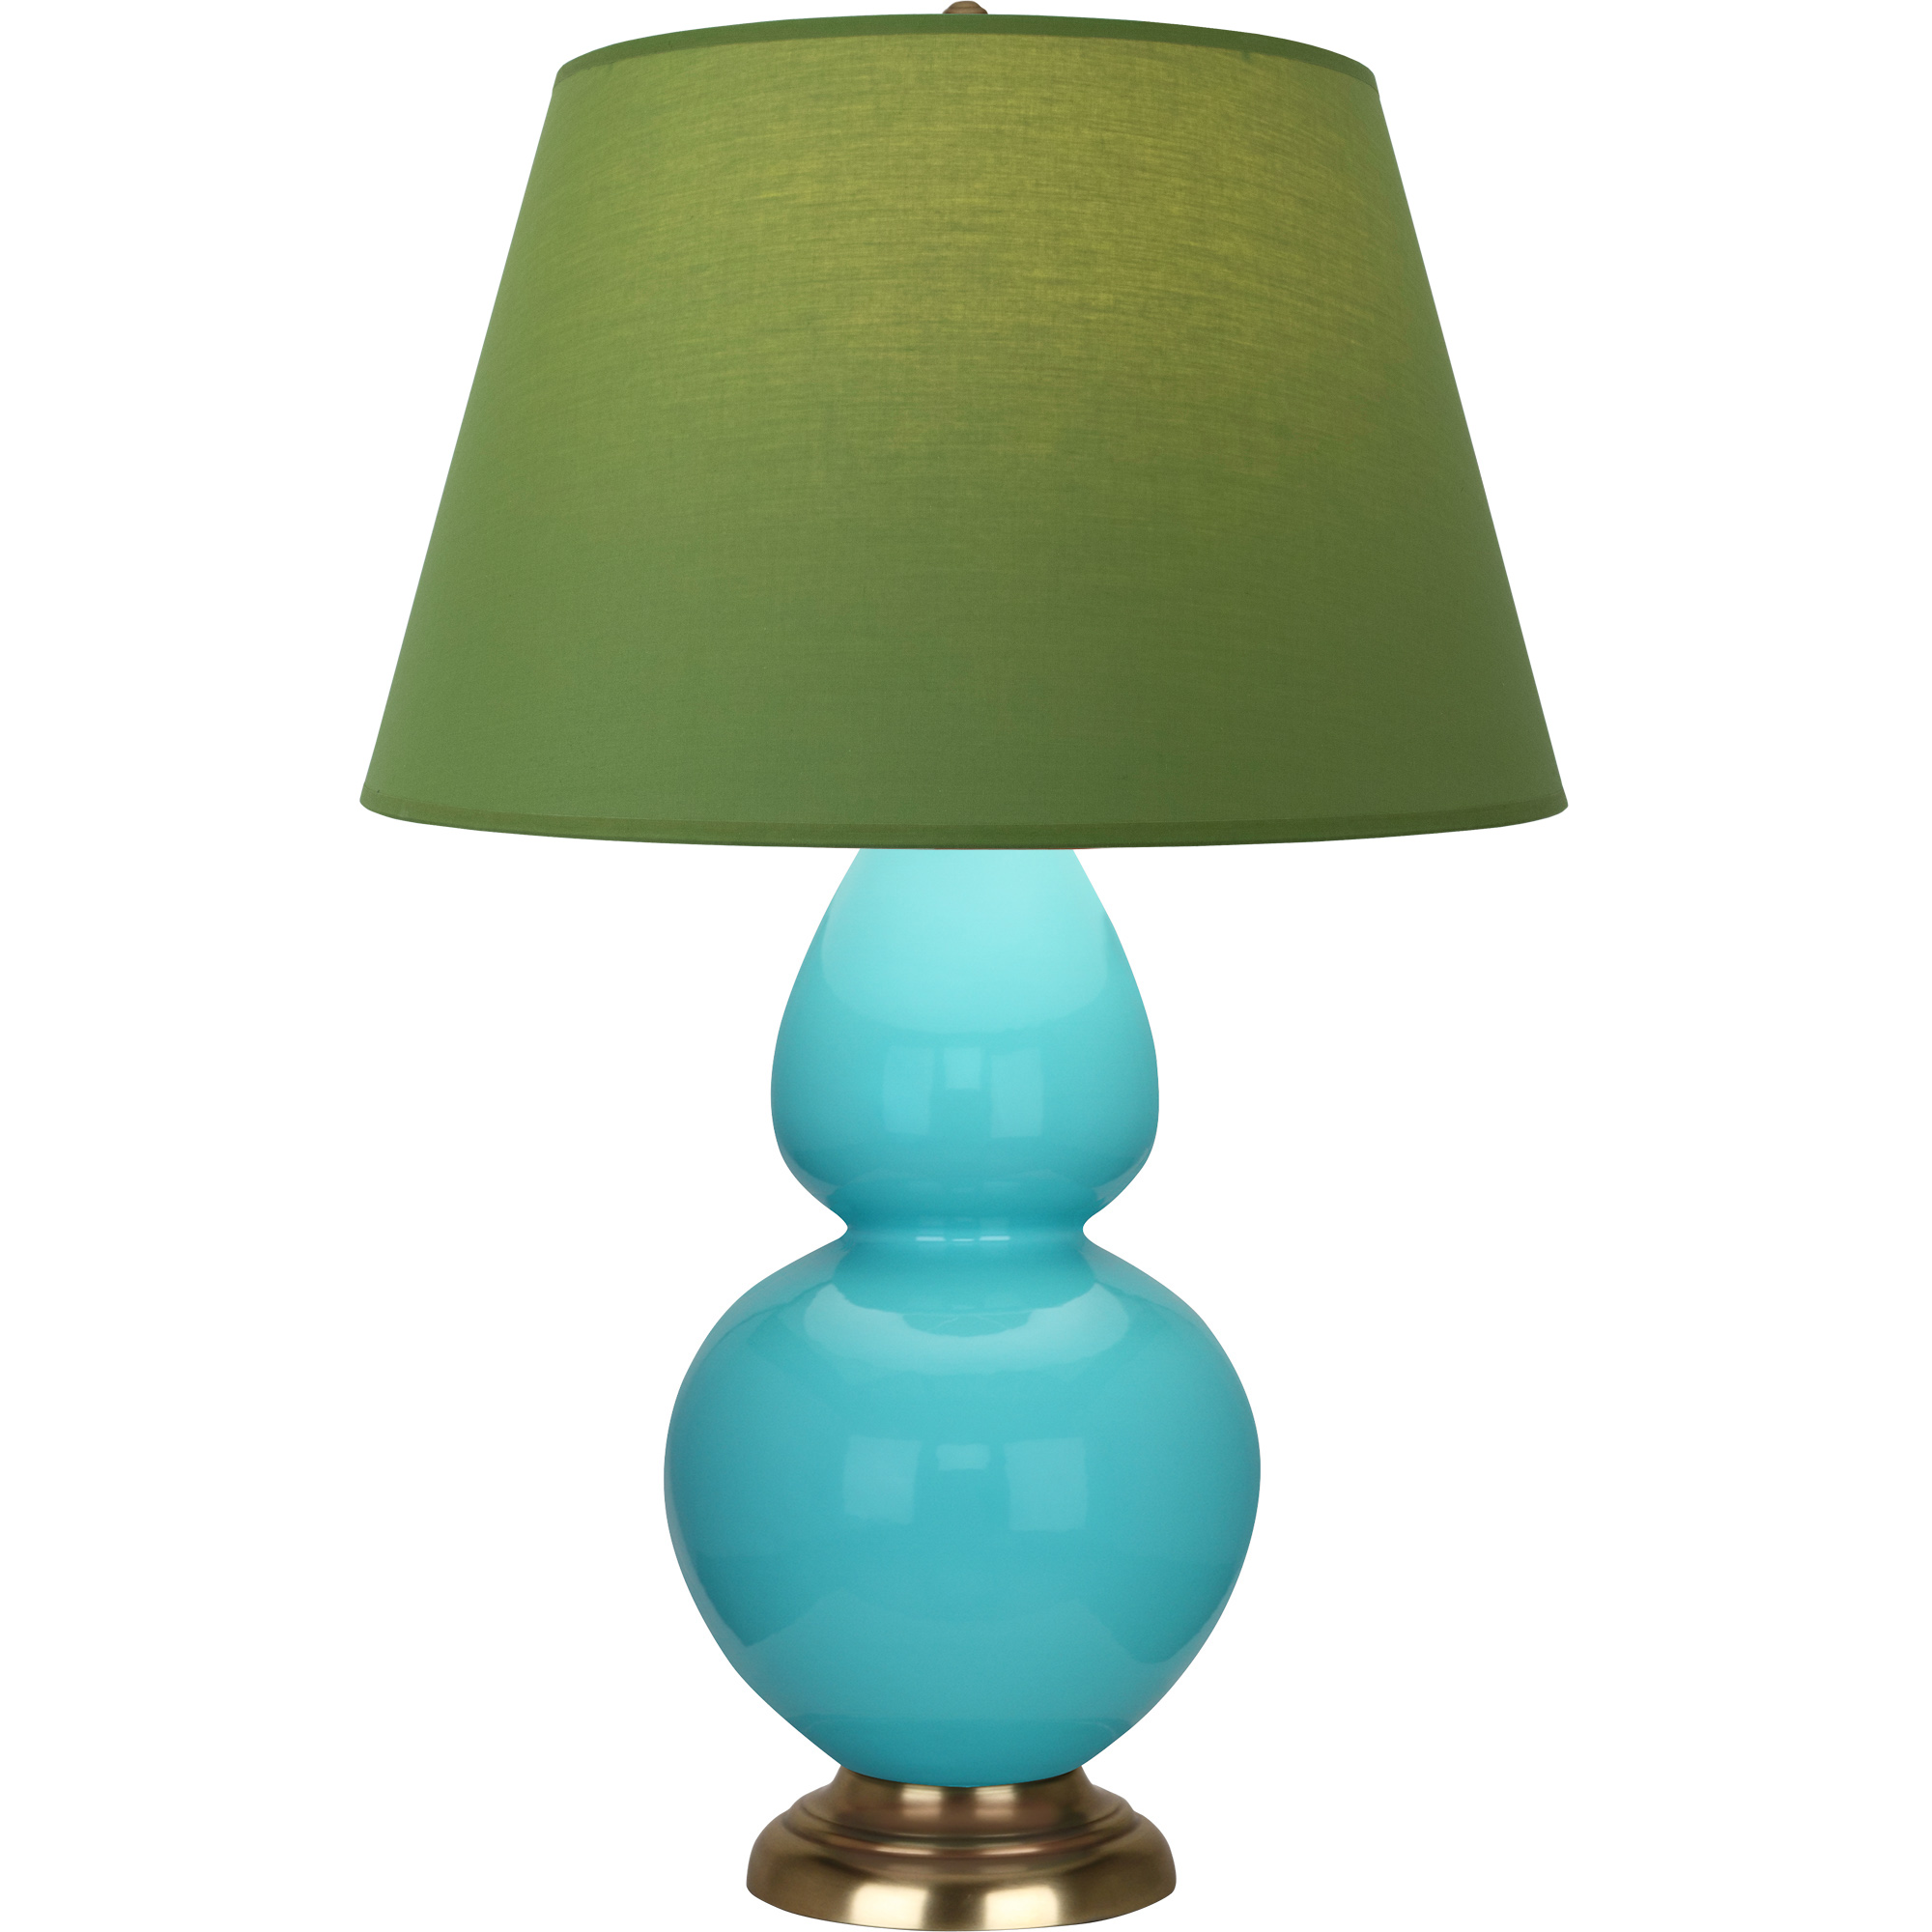 Double Gourd Table Lamp Style #1740G